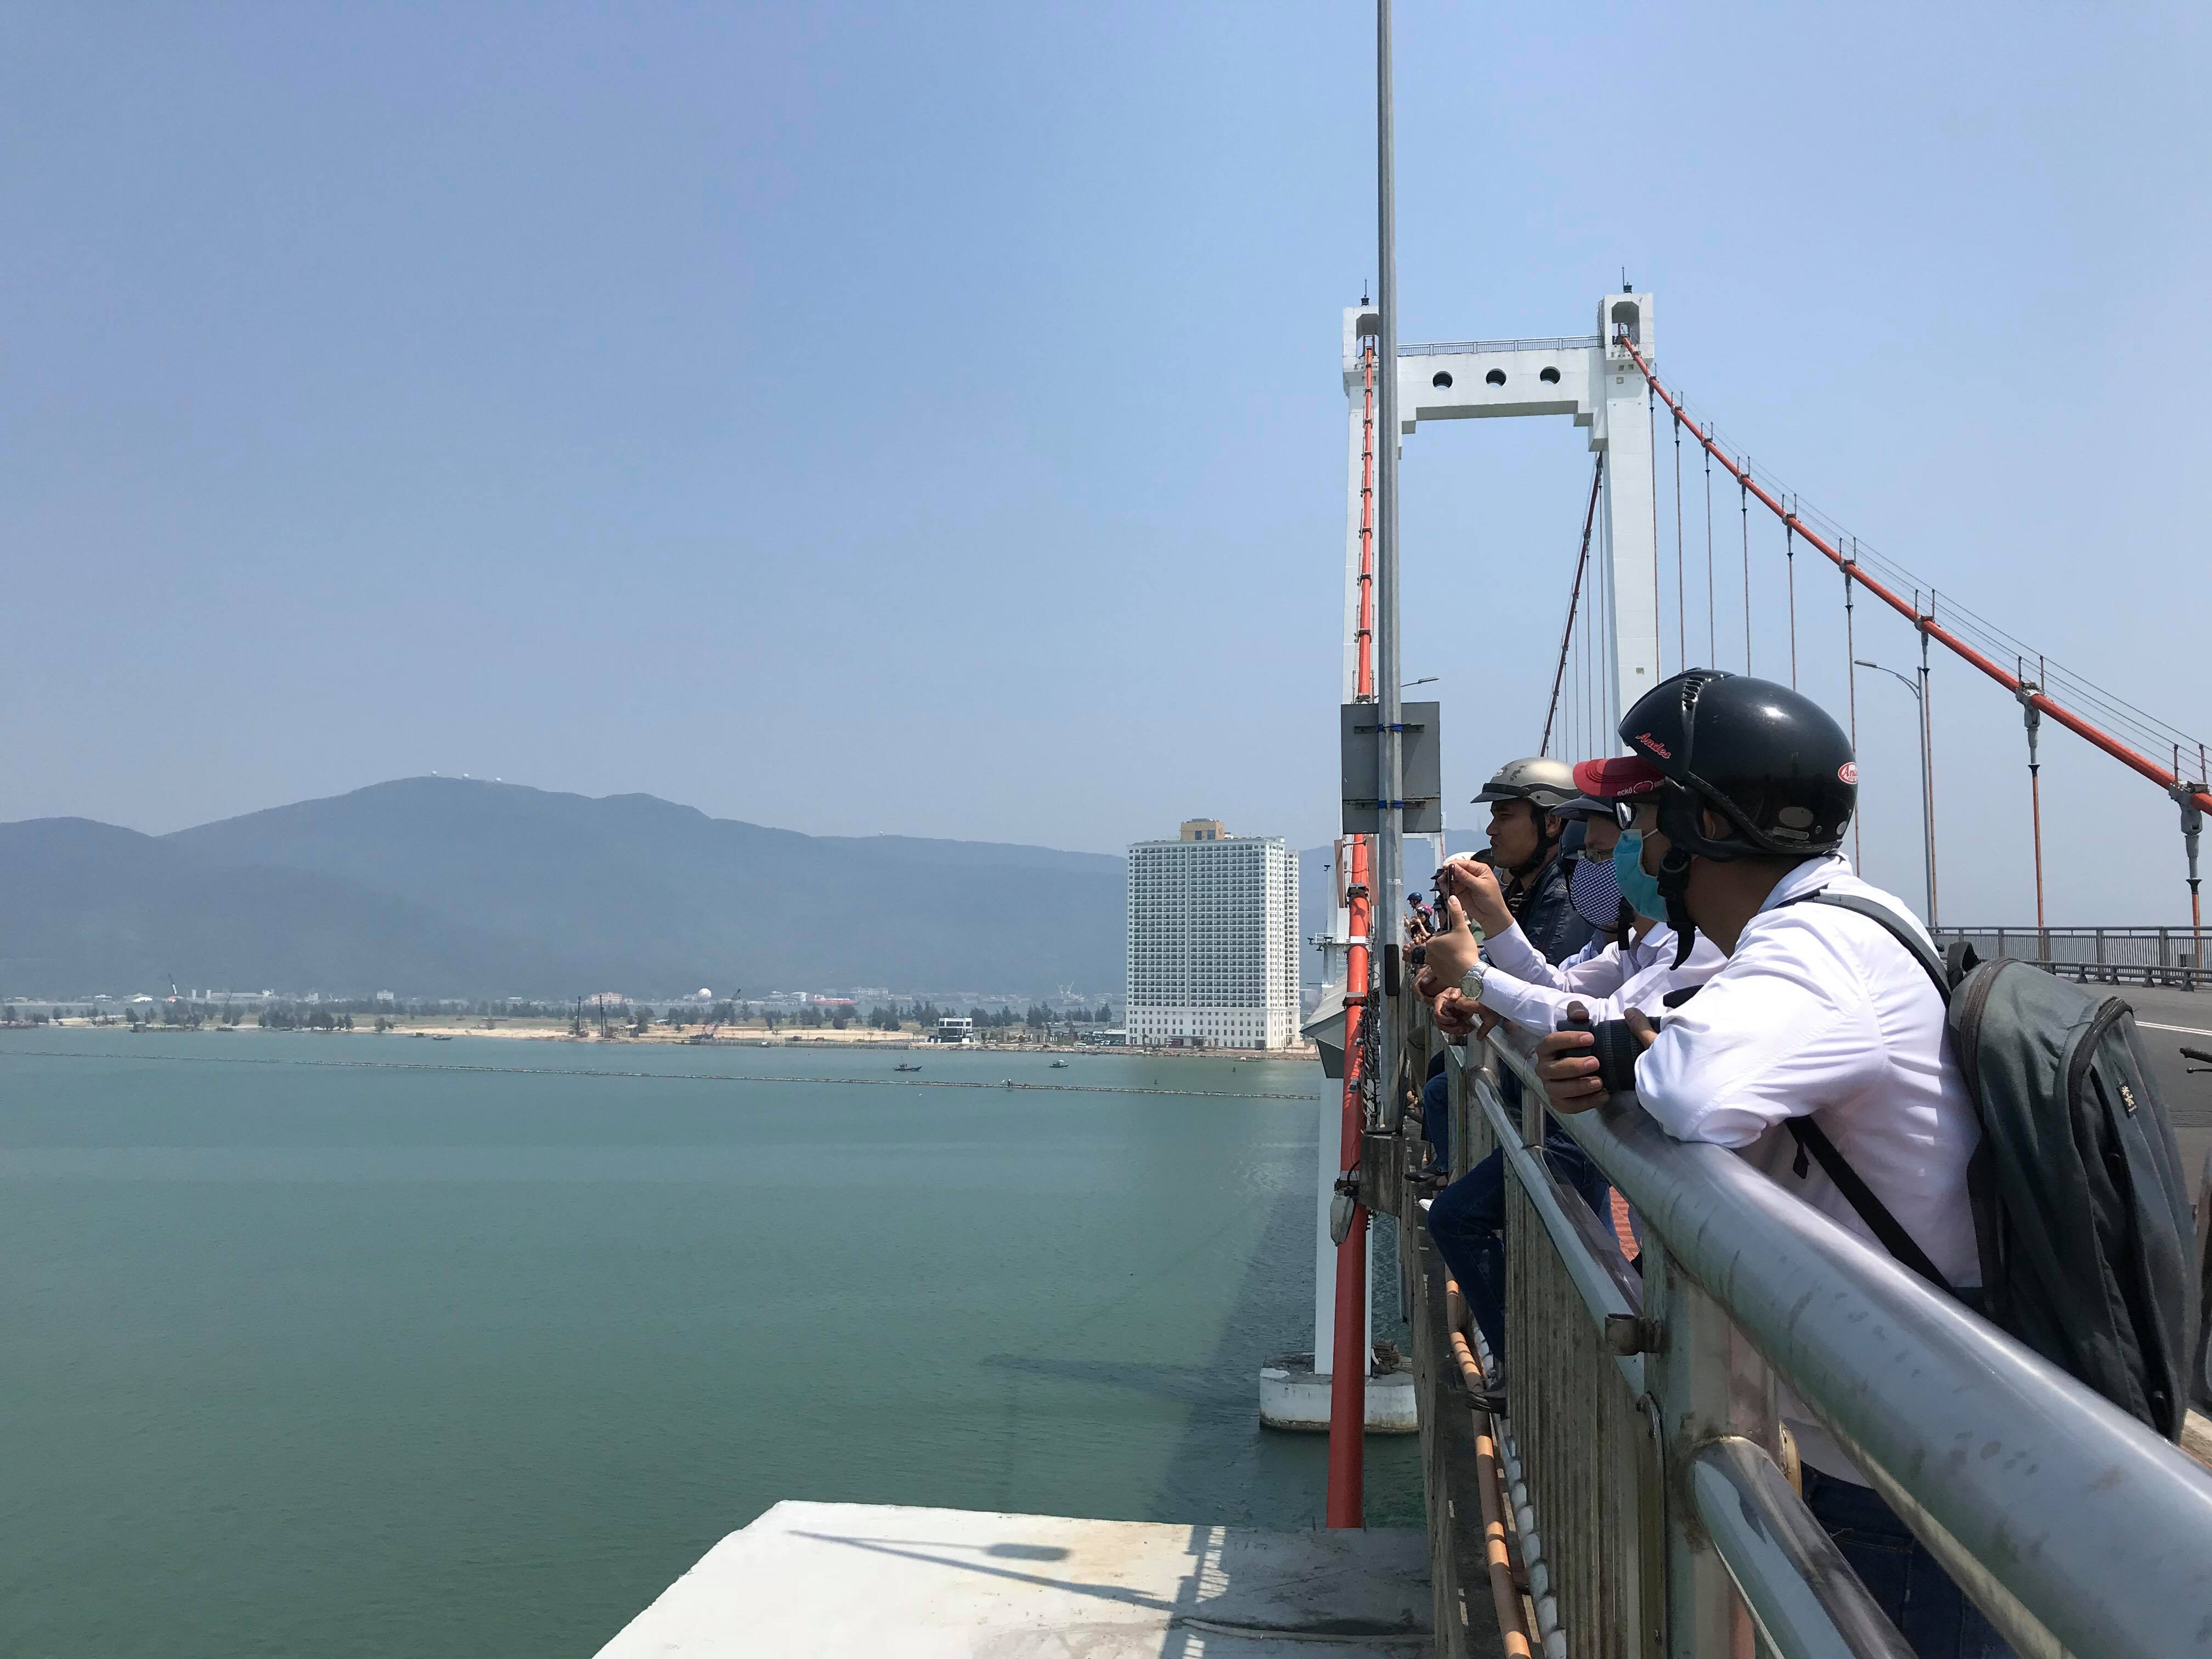 People wait on Thuan Phuoc Bridge to watch the arrival of the USS Carl Vinson in Da Nang. Photo: Tuoi Tre